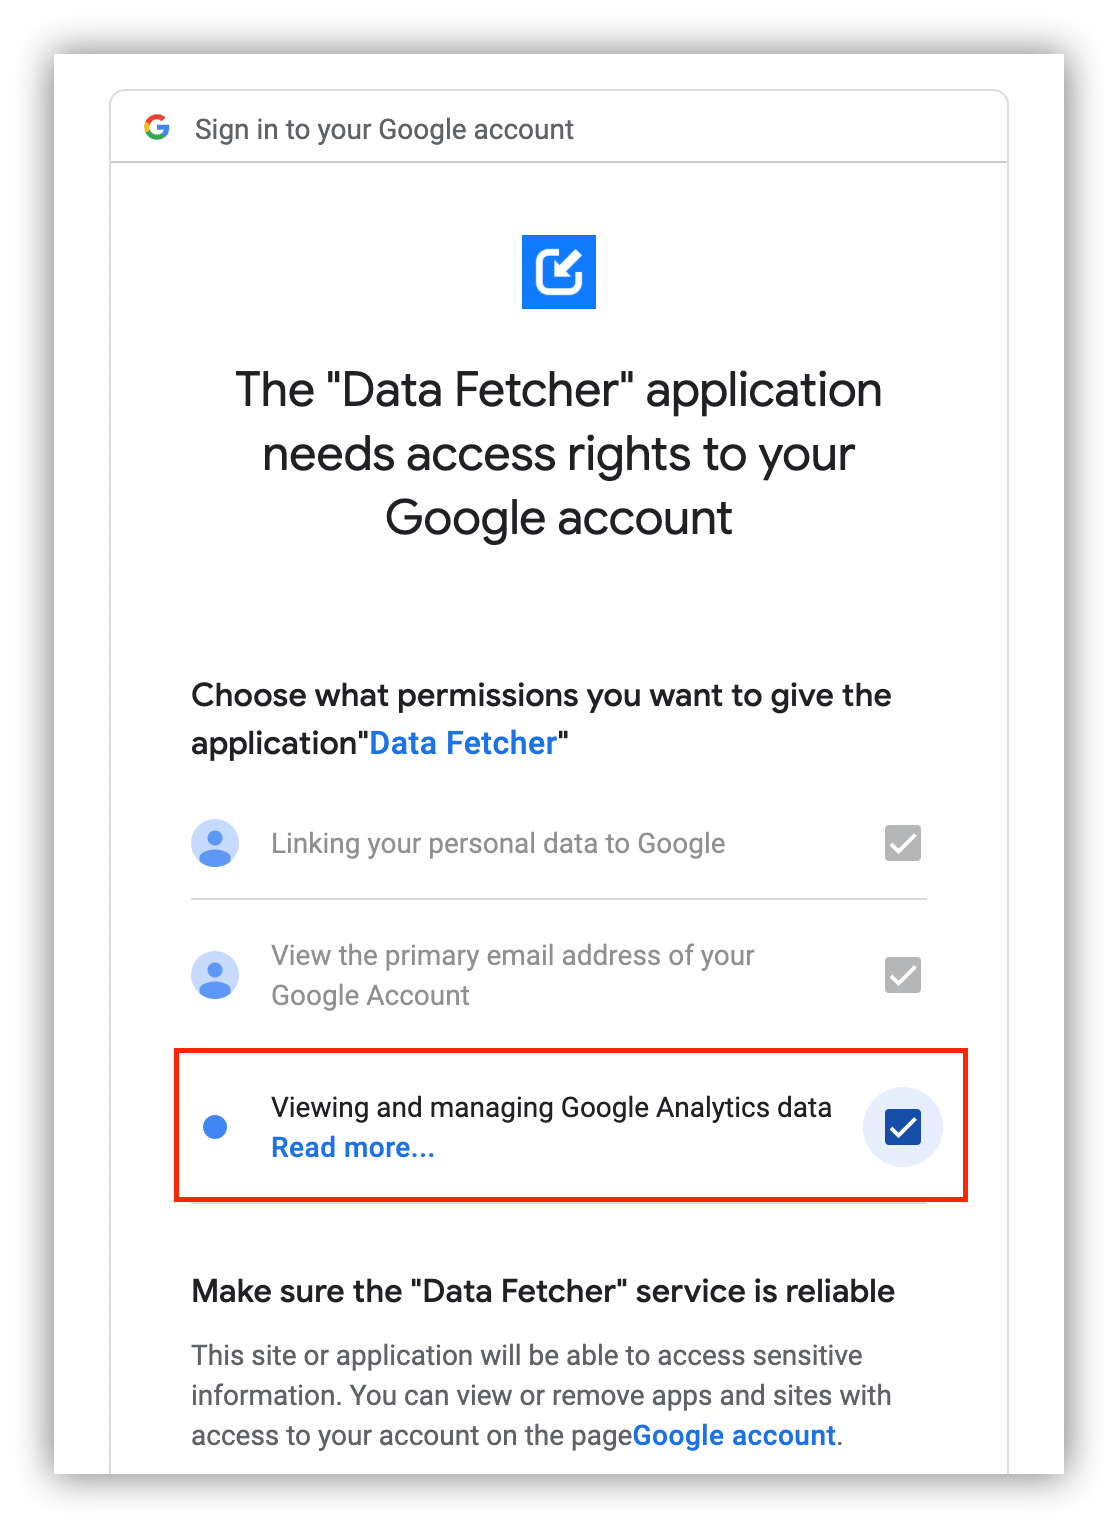 Allowing Data Fetcher to view and manage your GA data